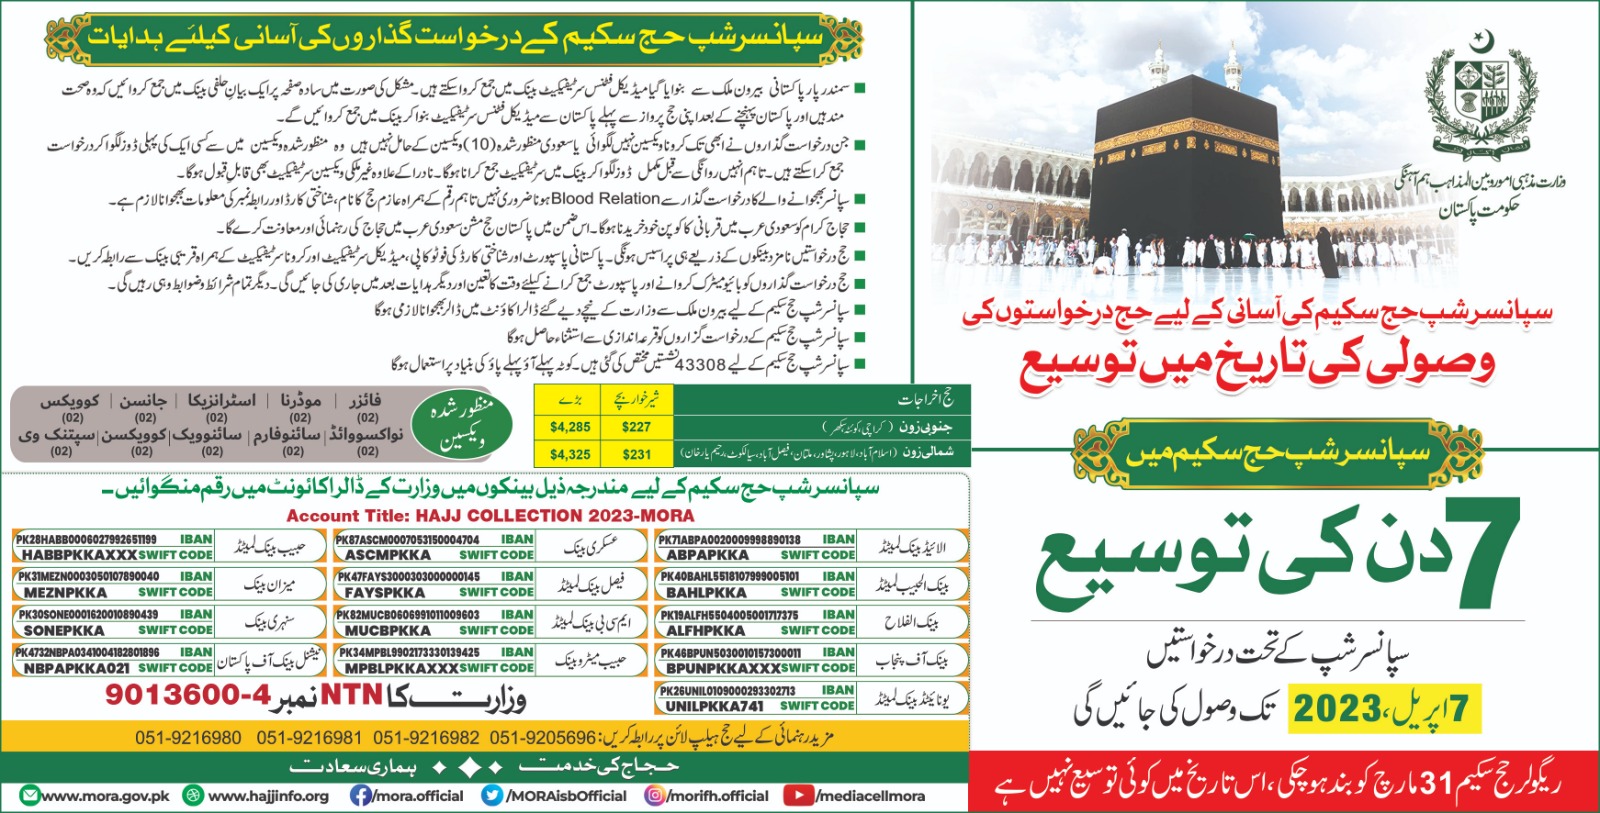 EXTENSION OF THE LAST DATE FOR SUBMISSION OF HAJJ 2023 APPLICATIONS